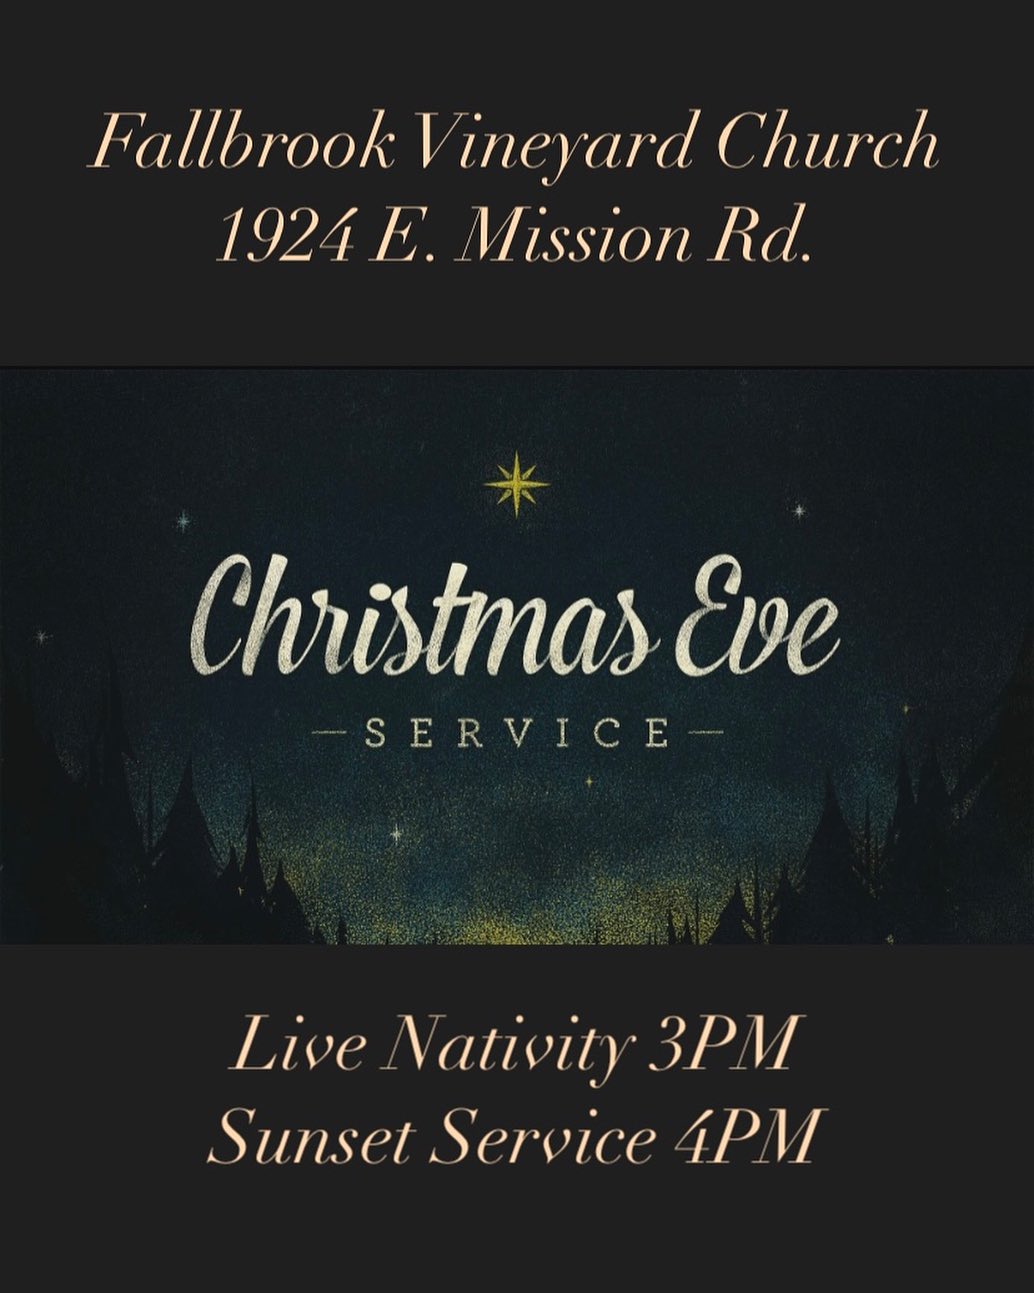 No morning service today. Bring someone THIS AFTERNOON for a memorable Christmas Eve at Fallbrook Vineyard Church! Live nativity at 3PM and sunset [...]
</p>
</body></html>